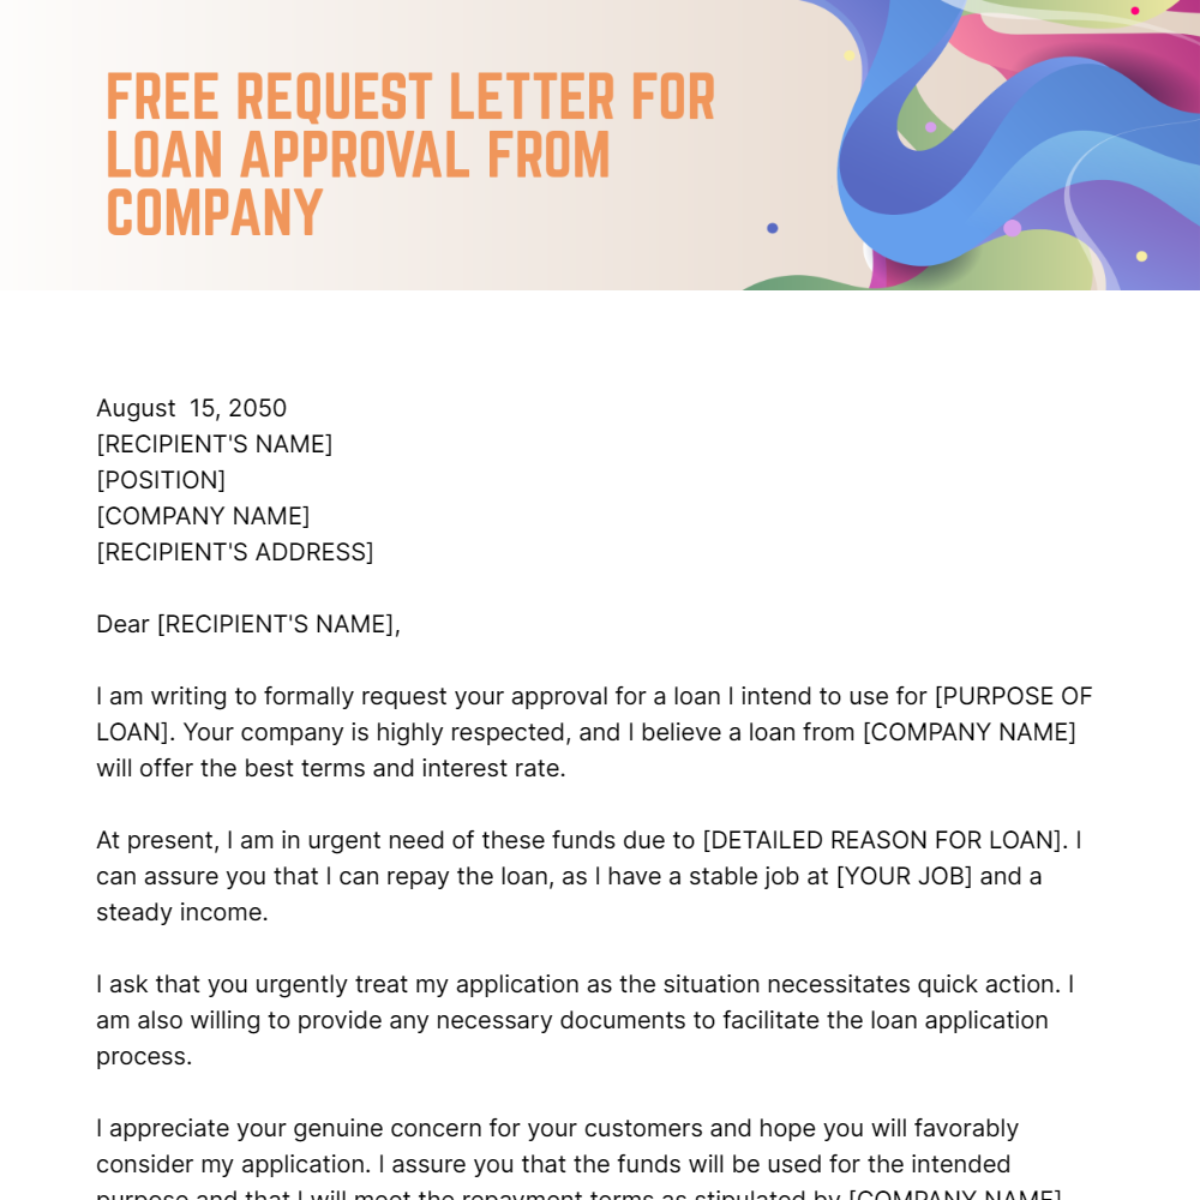 Request Letter for Loan Approval from Company Template